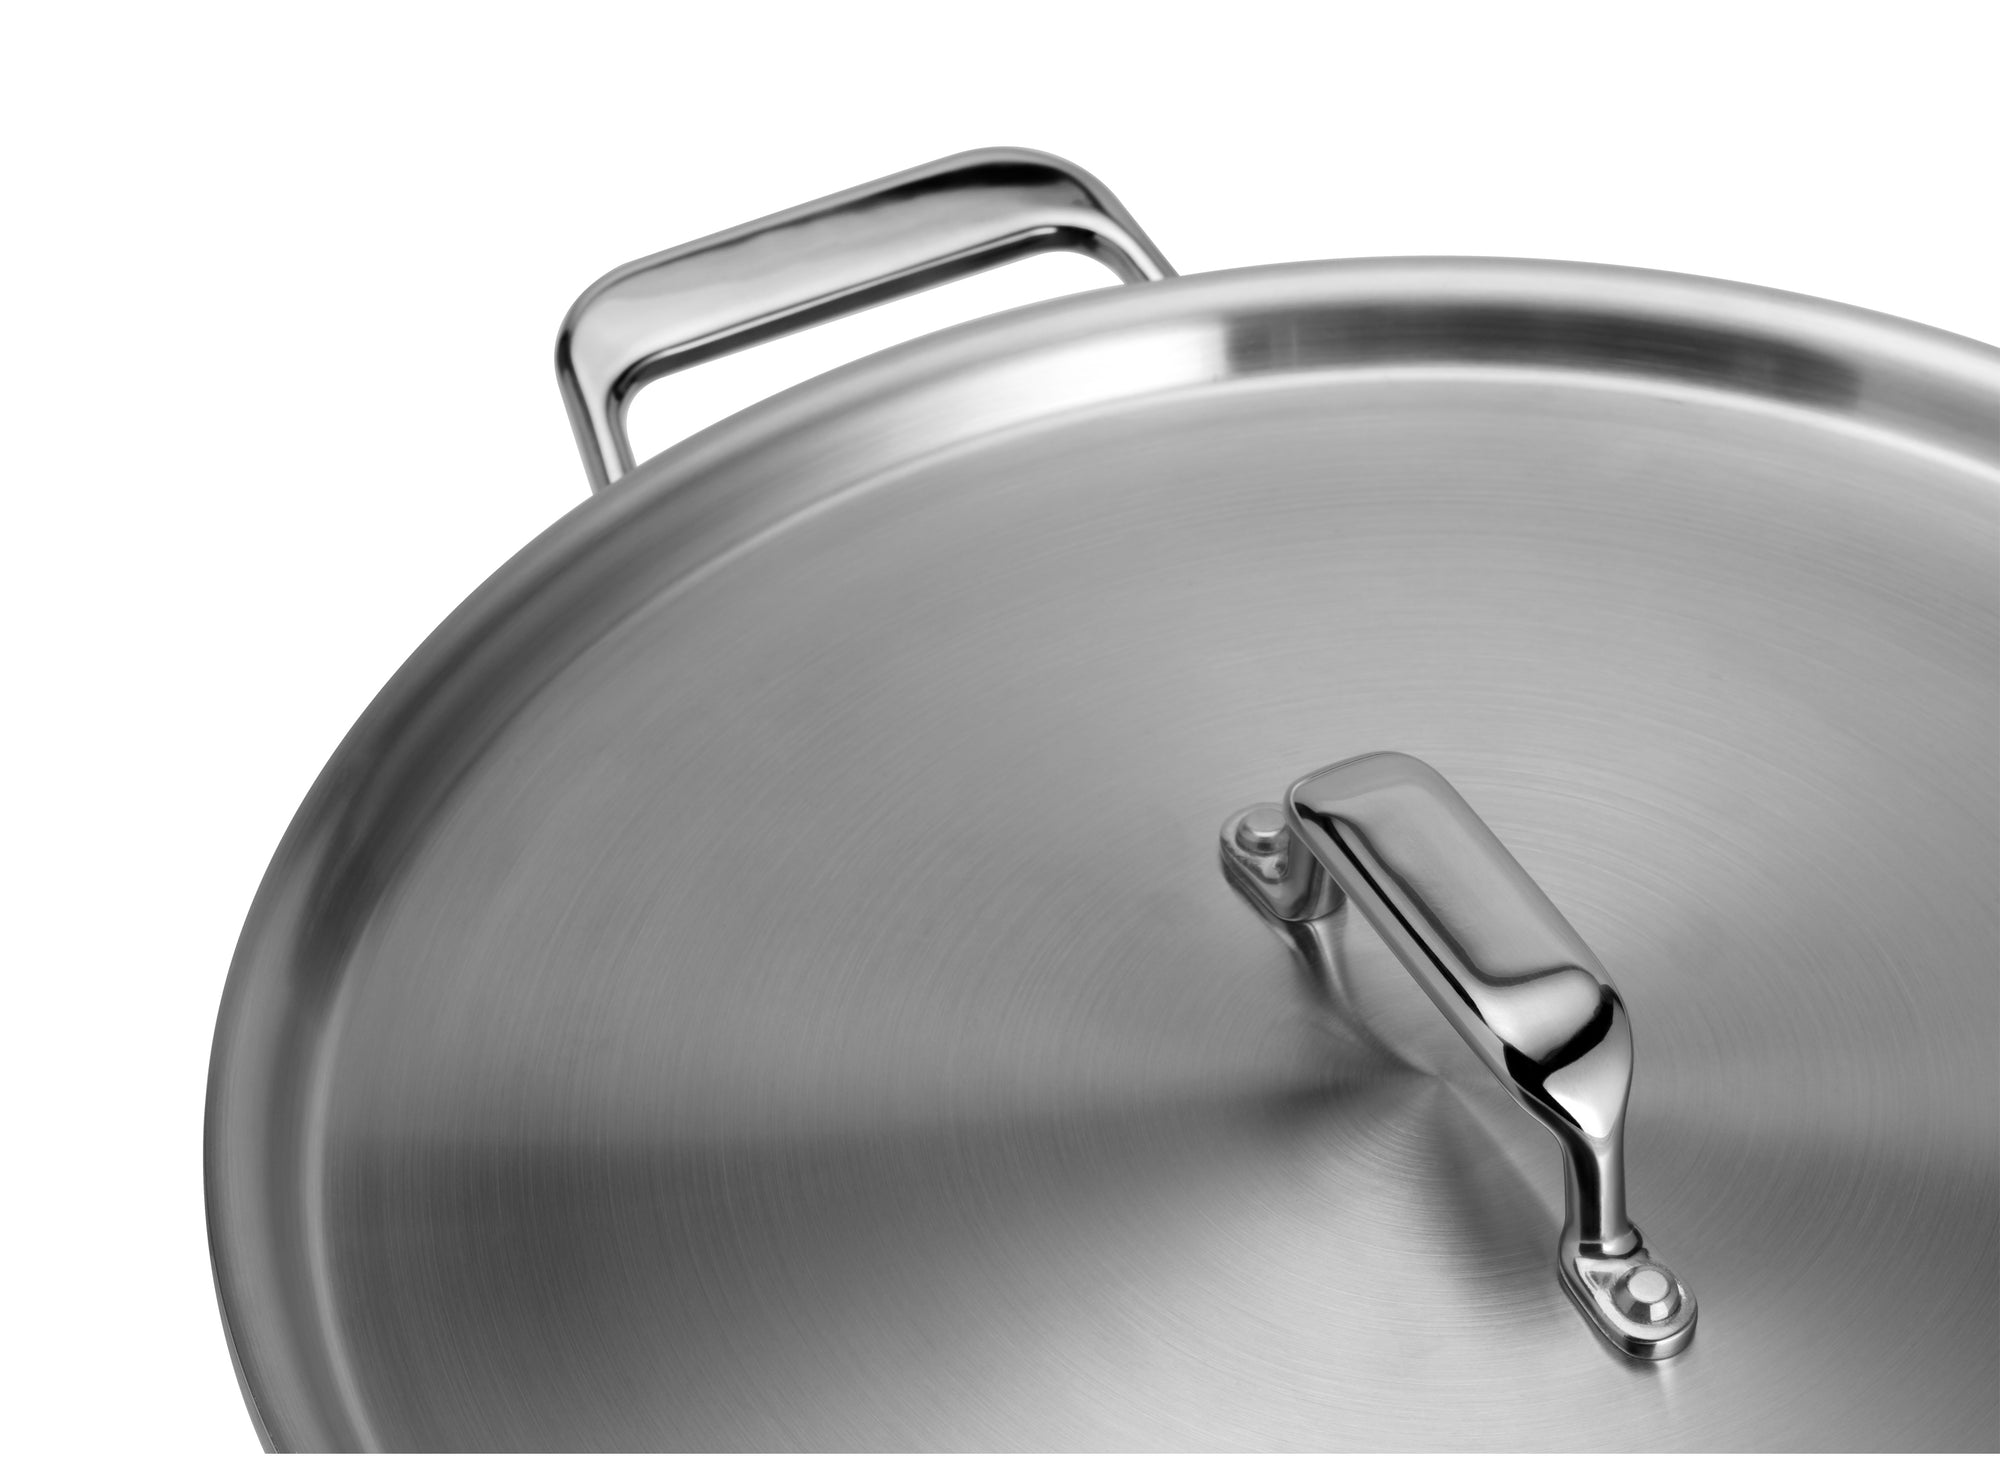 {{3-qt}} The Misen 3QT Saute pan comes with a stainless steel lid.